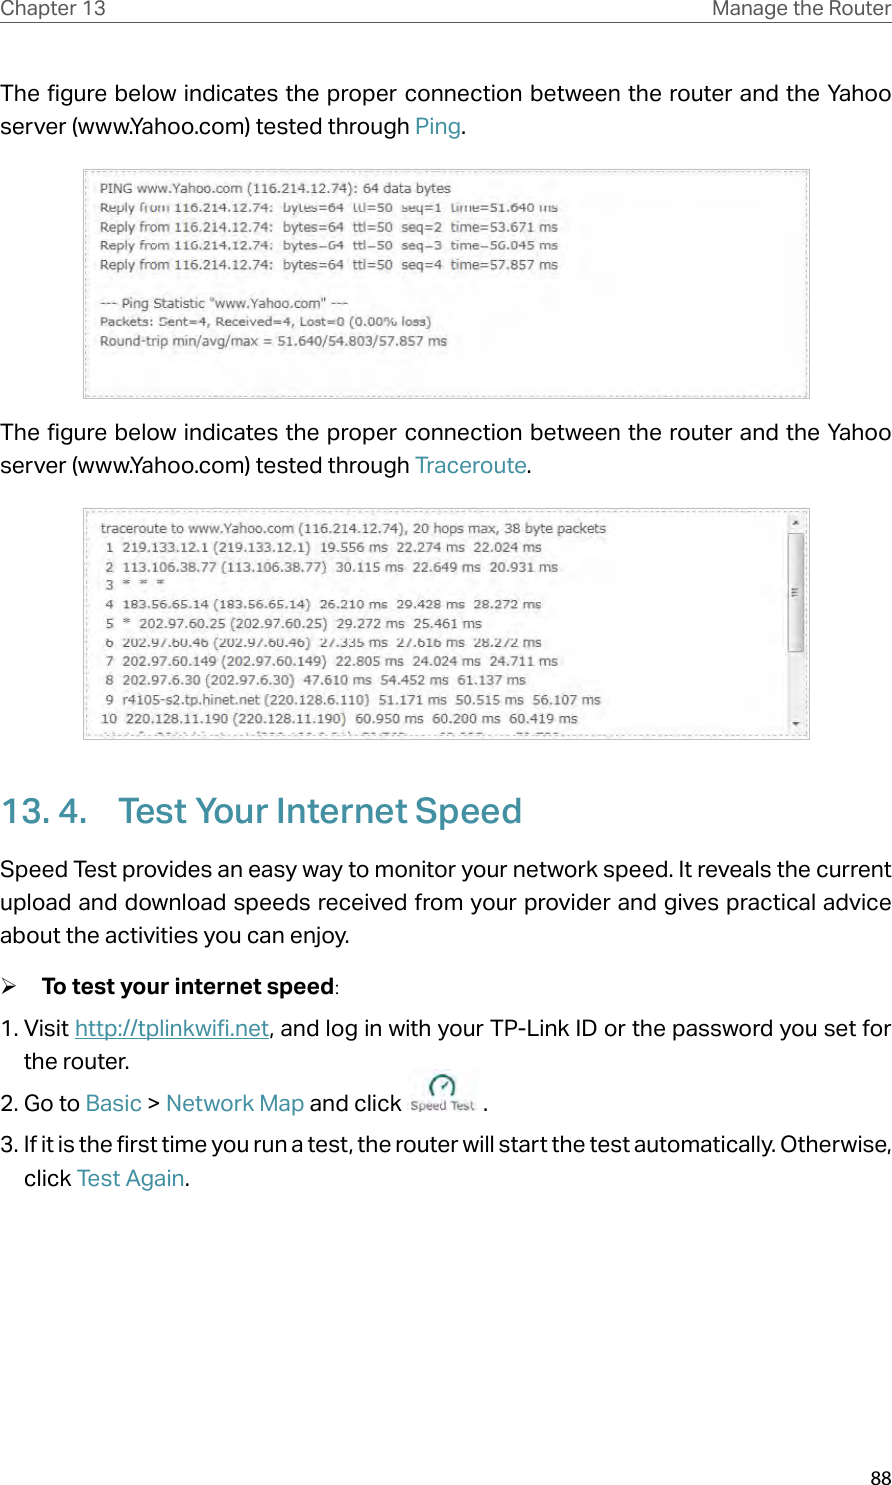 88Chapter 13 Manage the Router The figure below indicates the proper connection between the router and the Yahoo server (www.Yahoo.com) tested through Ping. The figure below indicates the proper connection between the router and the Yahoo server (www.Yahoo.com) tested through Traceroute.13. 4.  Test Your Internet SpeedSpeed Test provides an easy way to monitor your network speed. It reveals the current upload and download speeds received from your provider and gives practical advice about the activities you can enjoy. ¾To test your internet speed:1. Visit http://tplinkwifi.net, and log in with your TP-Link ID or the password you set for the router.2. Go to Basic &gt; Network Map and click   .3. If it is the first time you run a test, the router will start the test automatically. Otherwise, click Test Again.